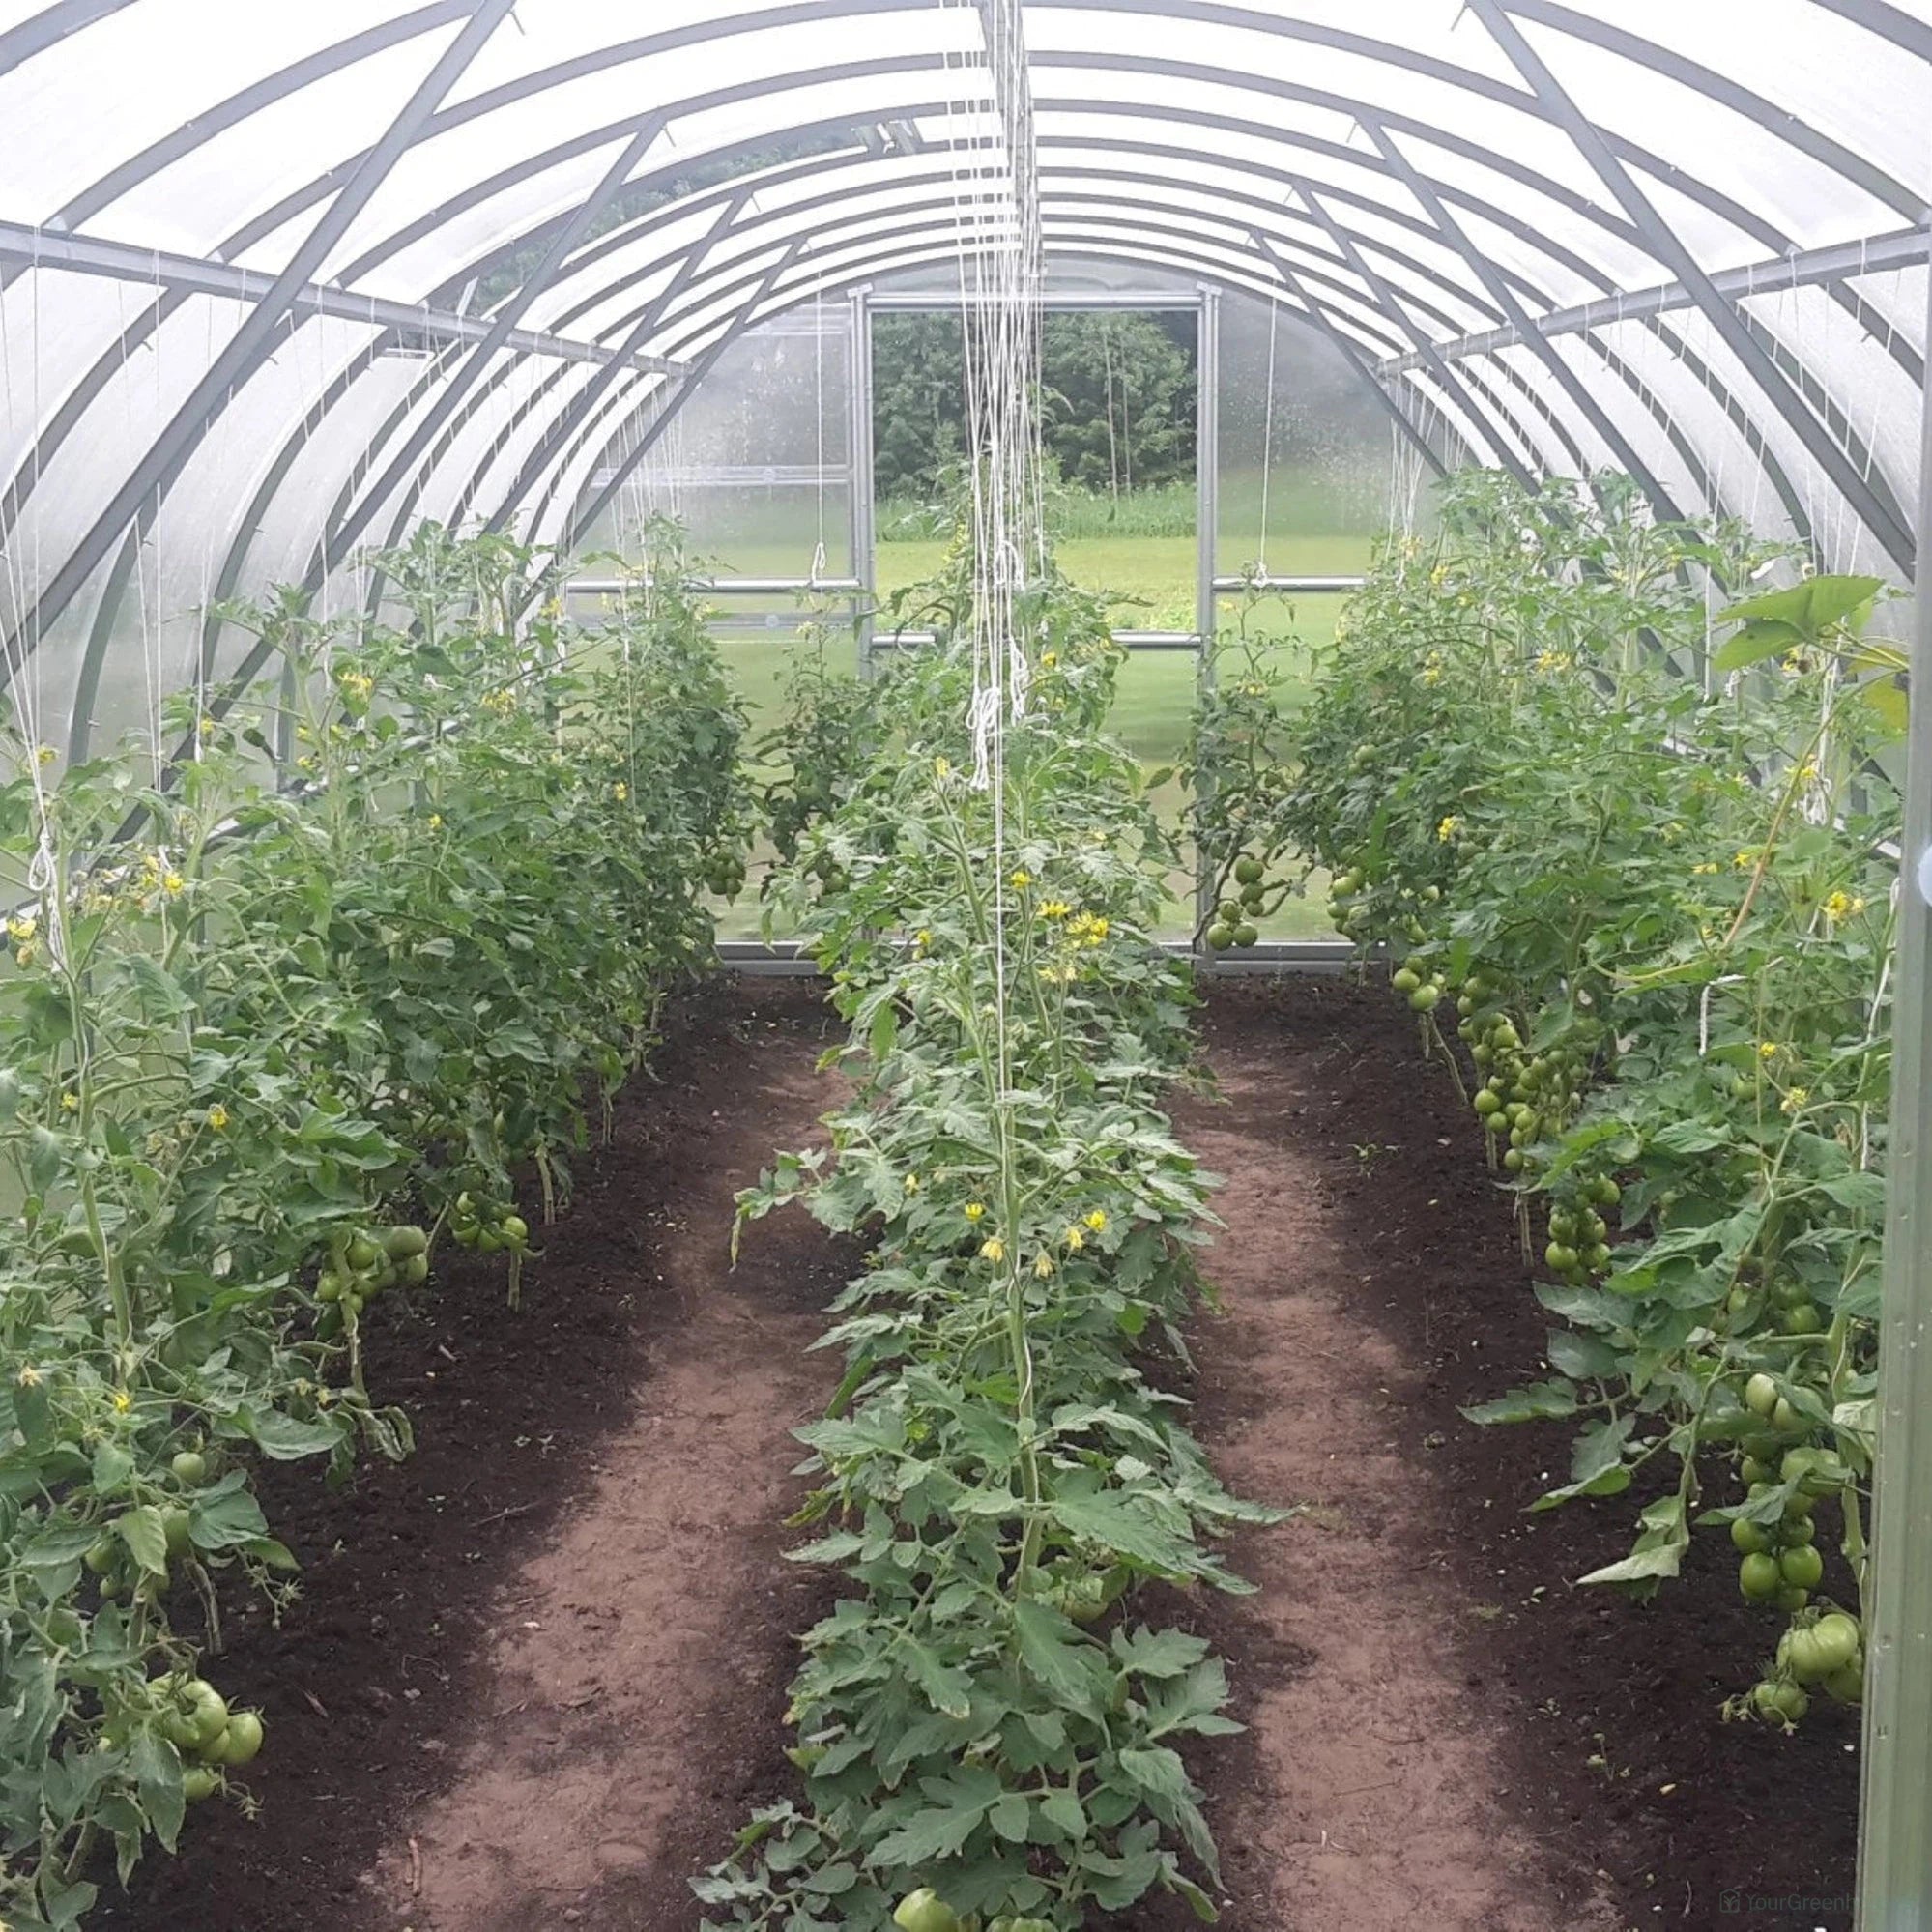 worlds most popular greenhouse with tomatos in 3 rows and window behind